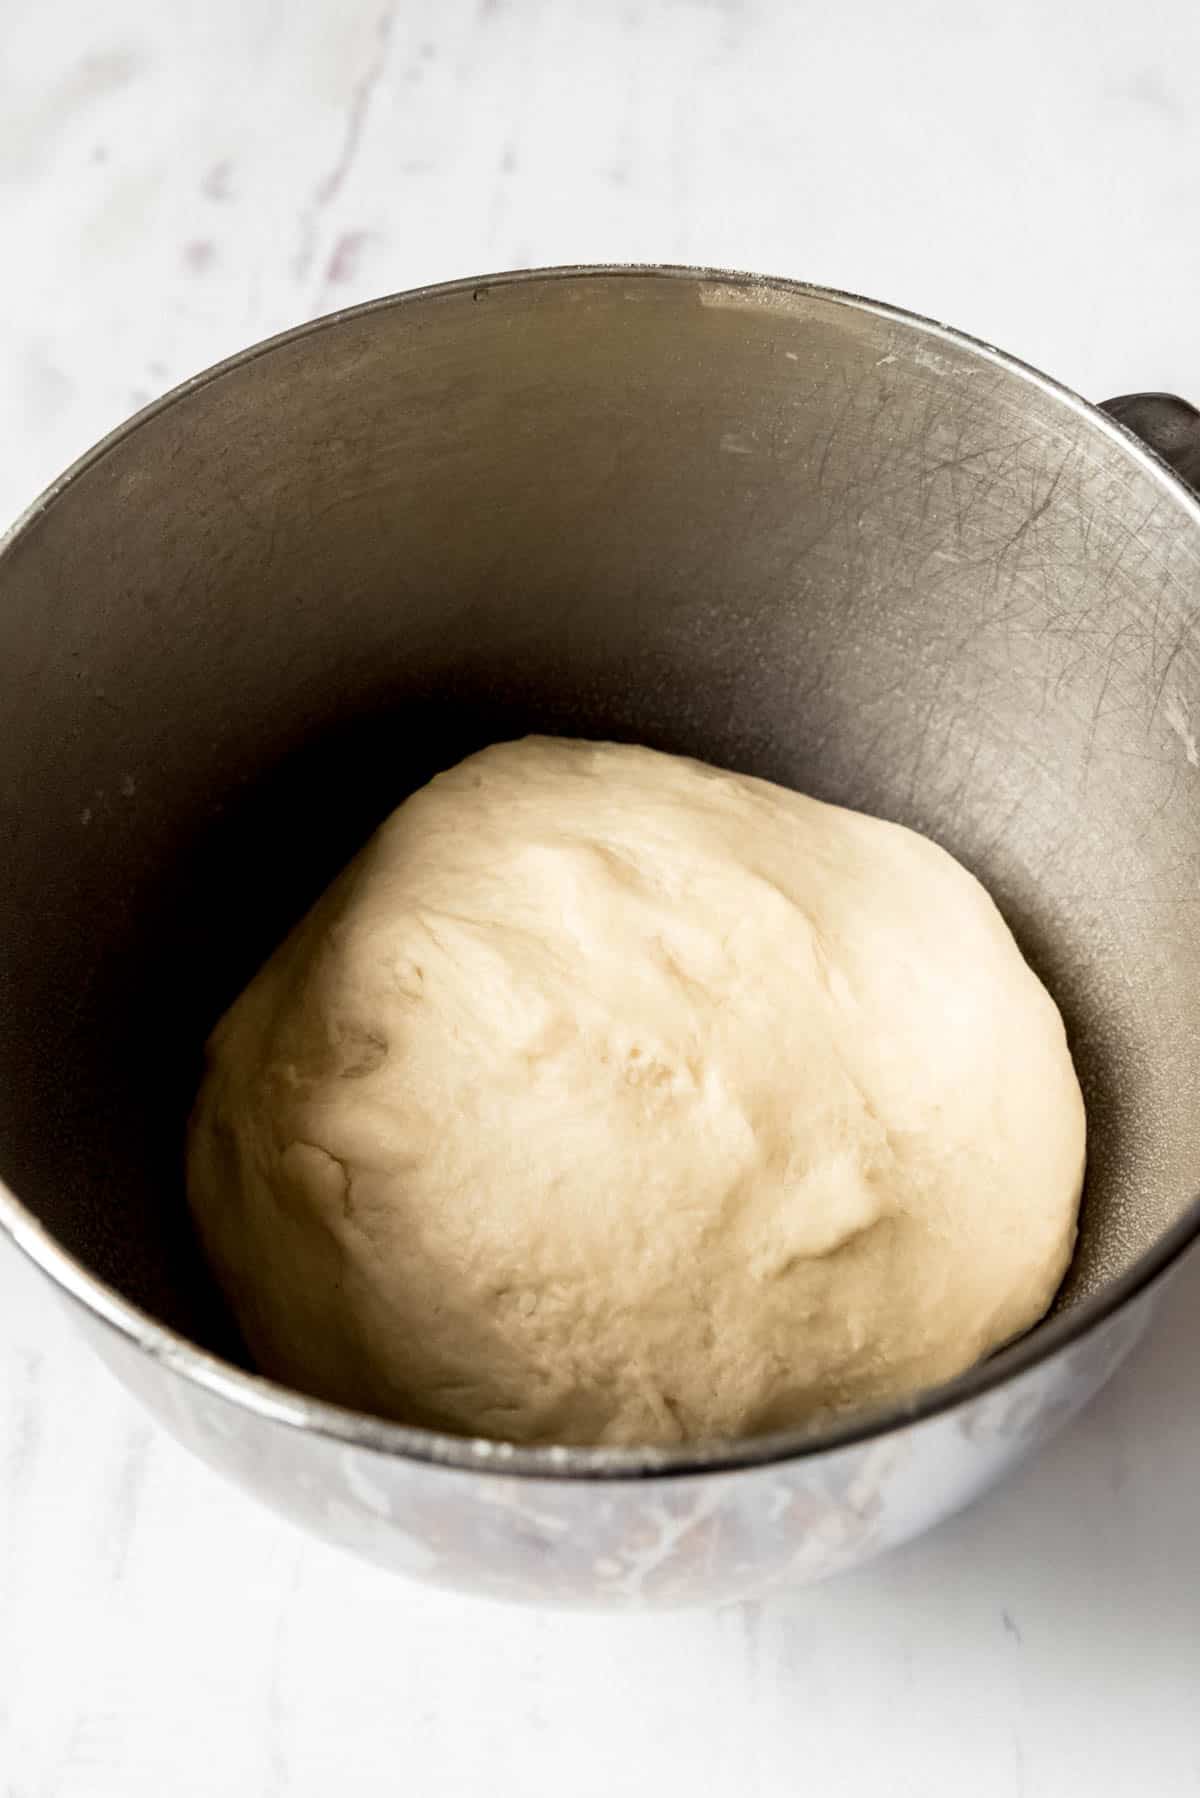 Kneaded roll dough ready to proof.